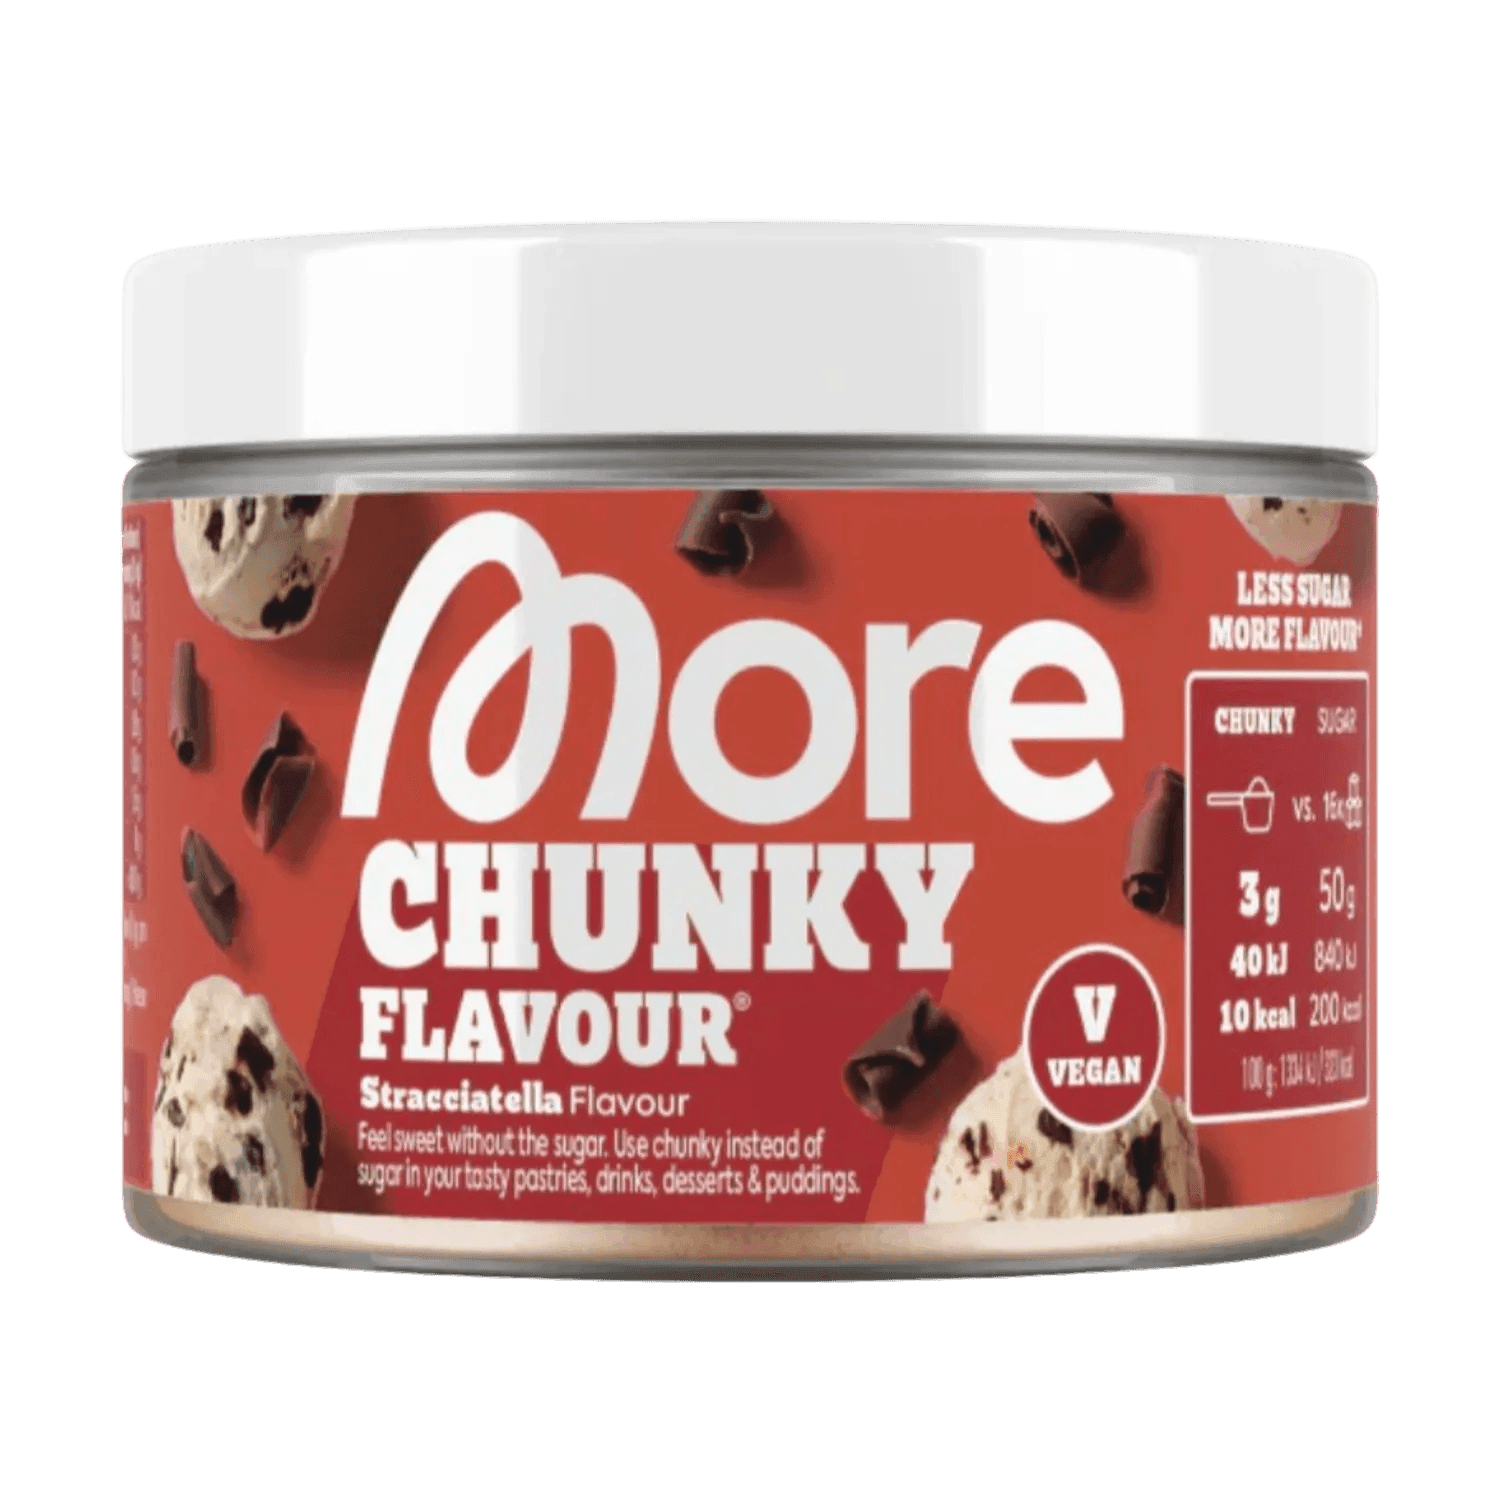 More Nutrition Chunky Flavour 250g product - a delicious and nutritious addition to your meals